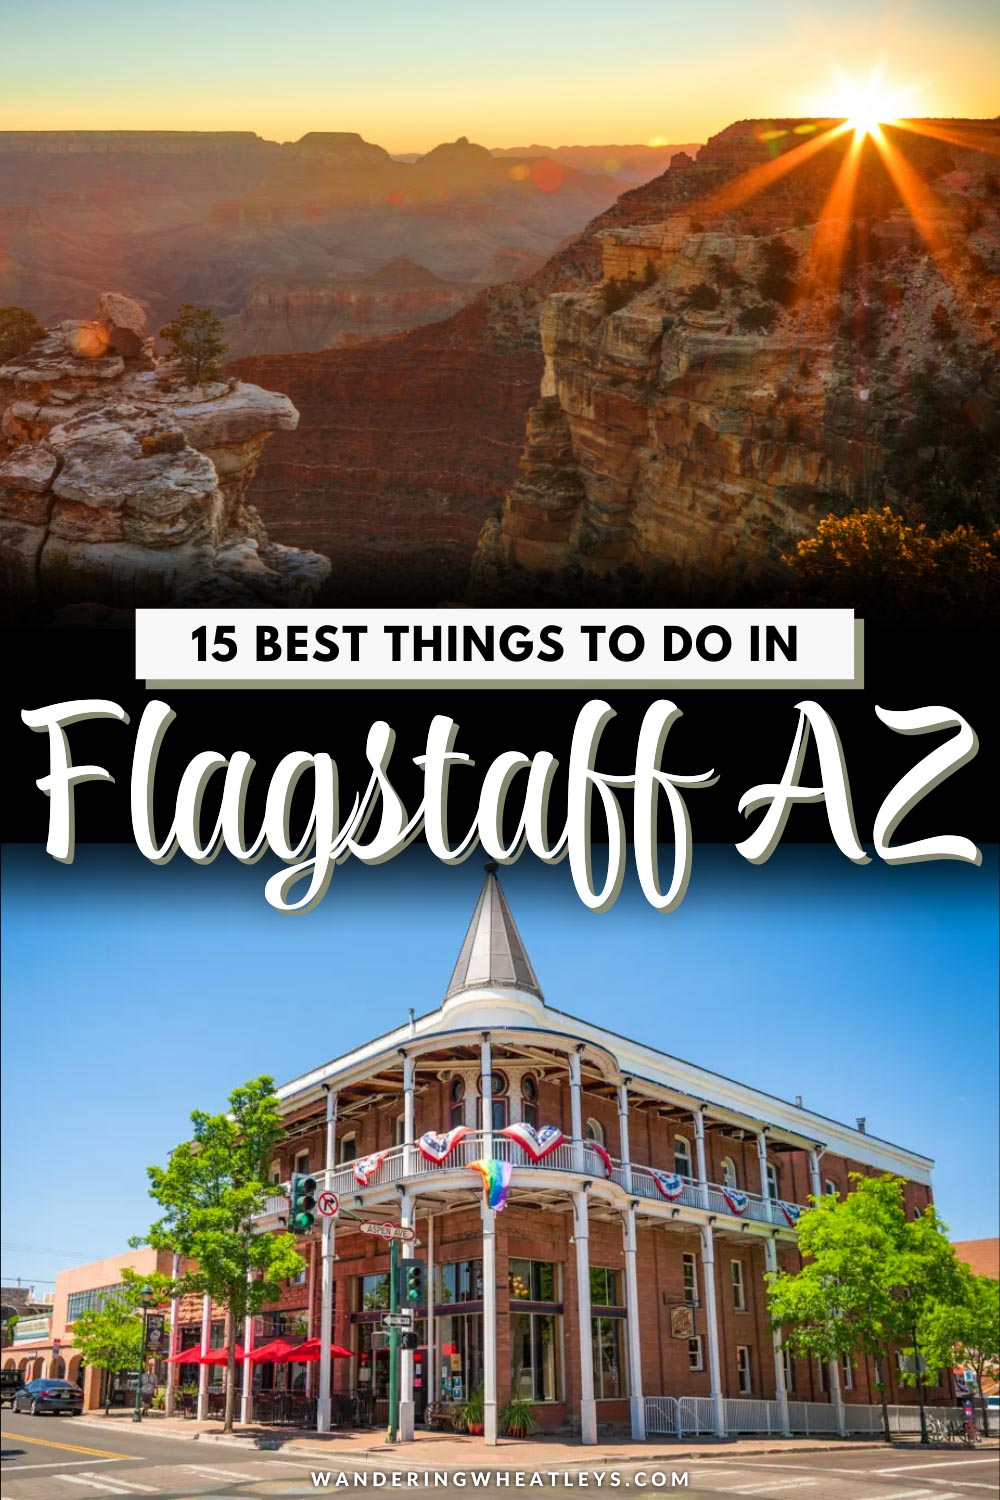 The Best Things to do in Flagstaff, Arizona